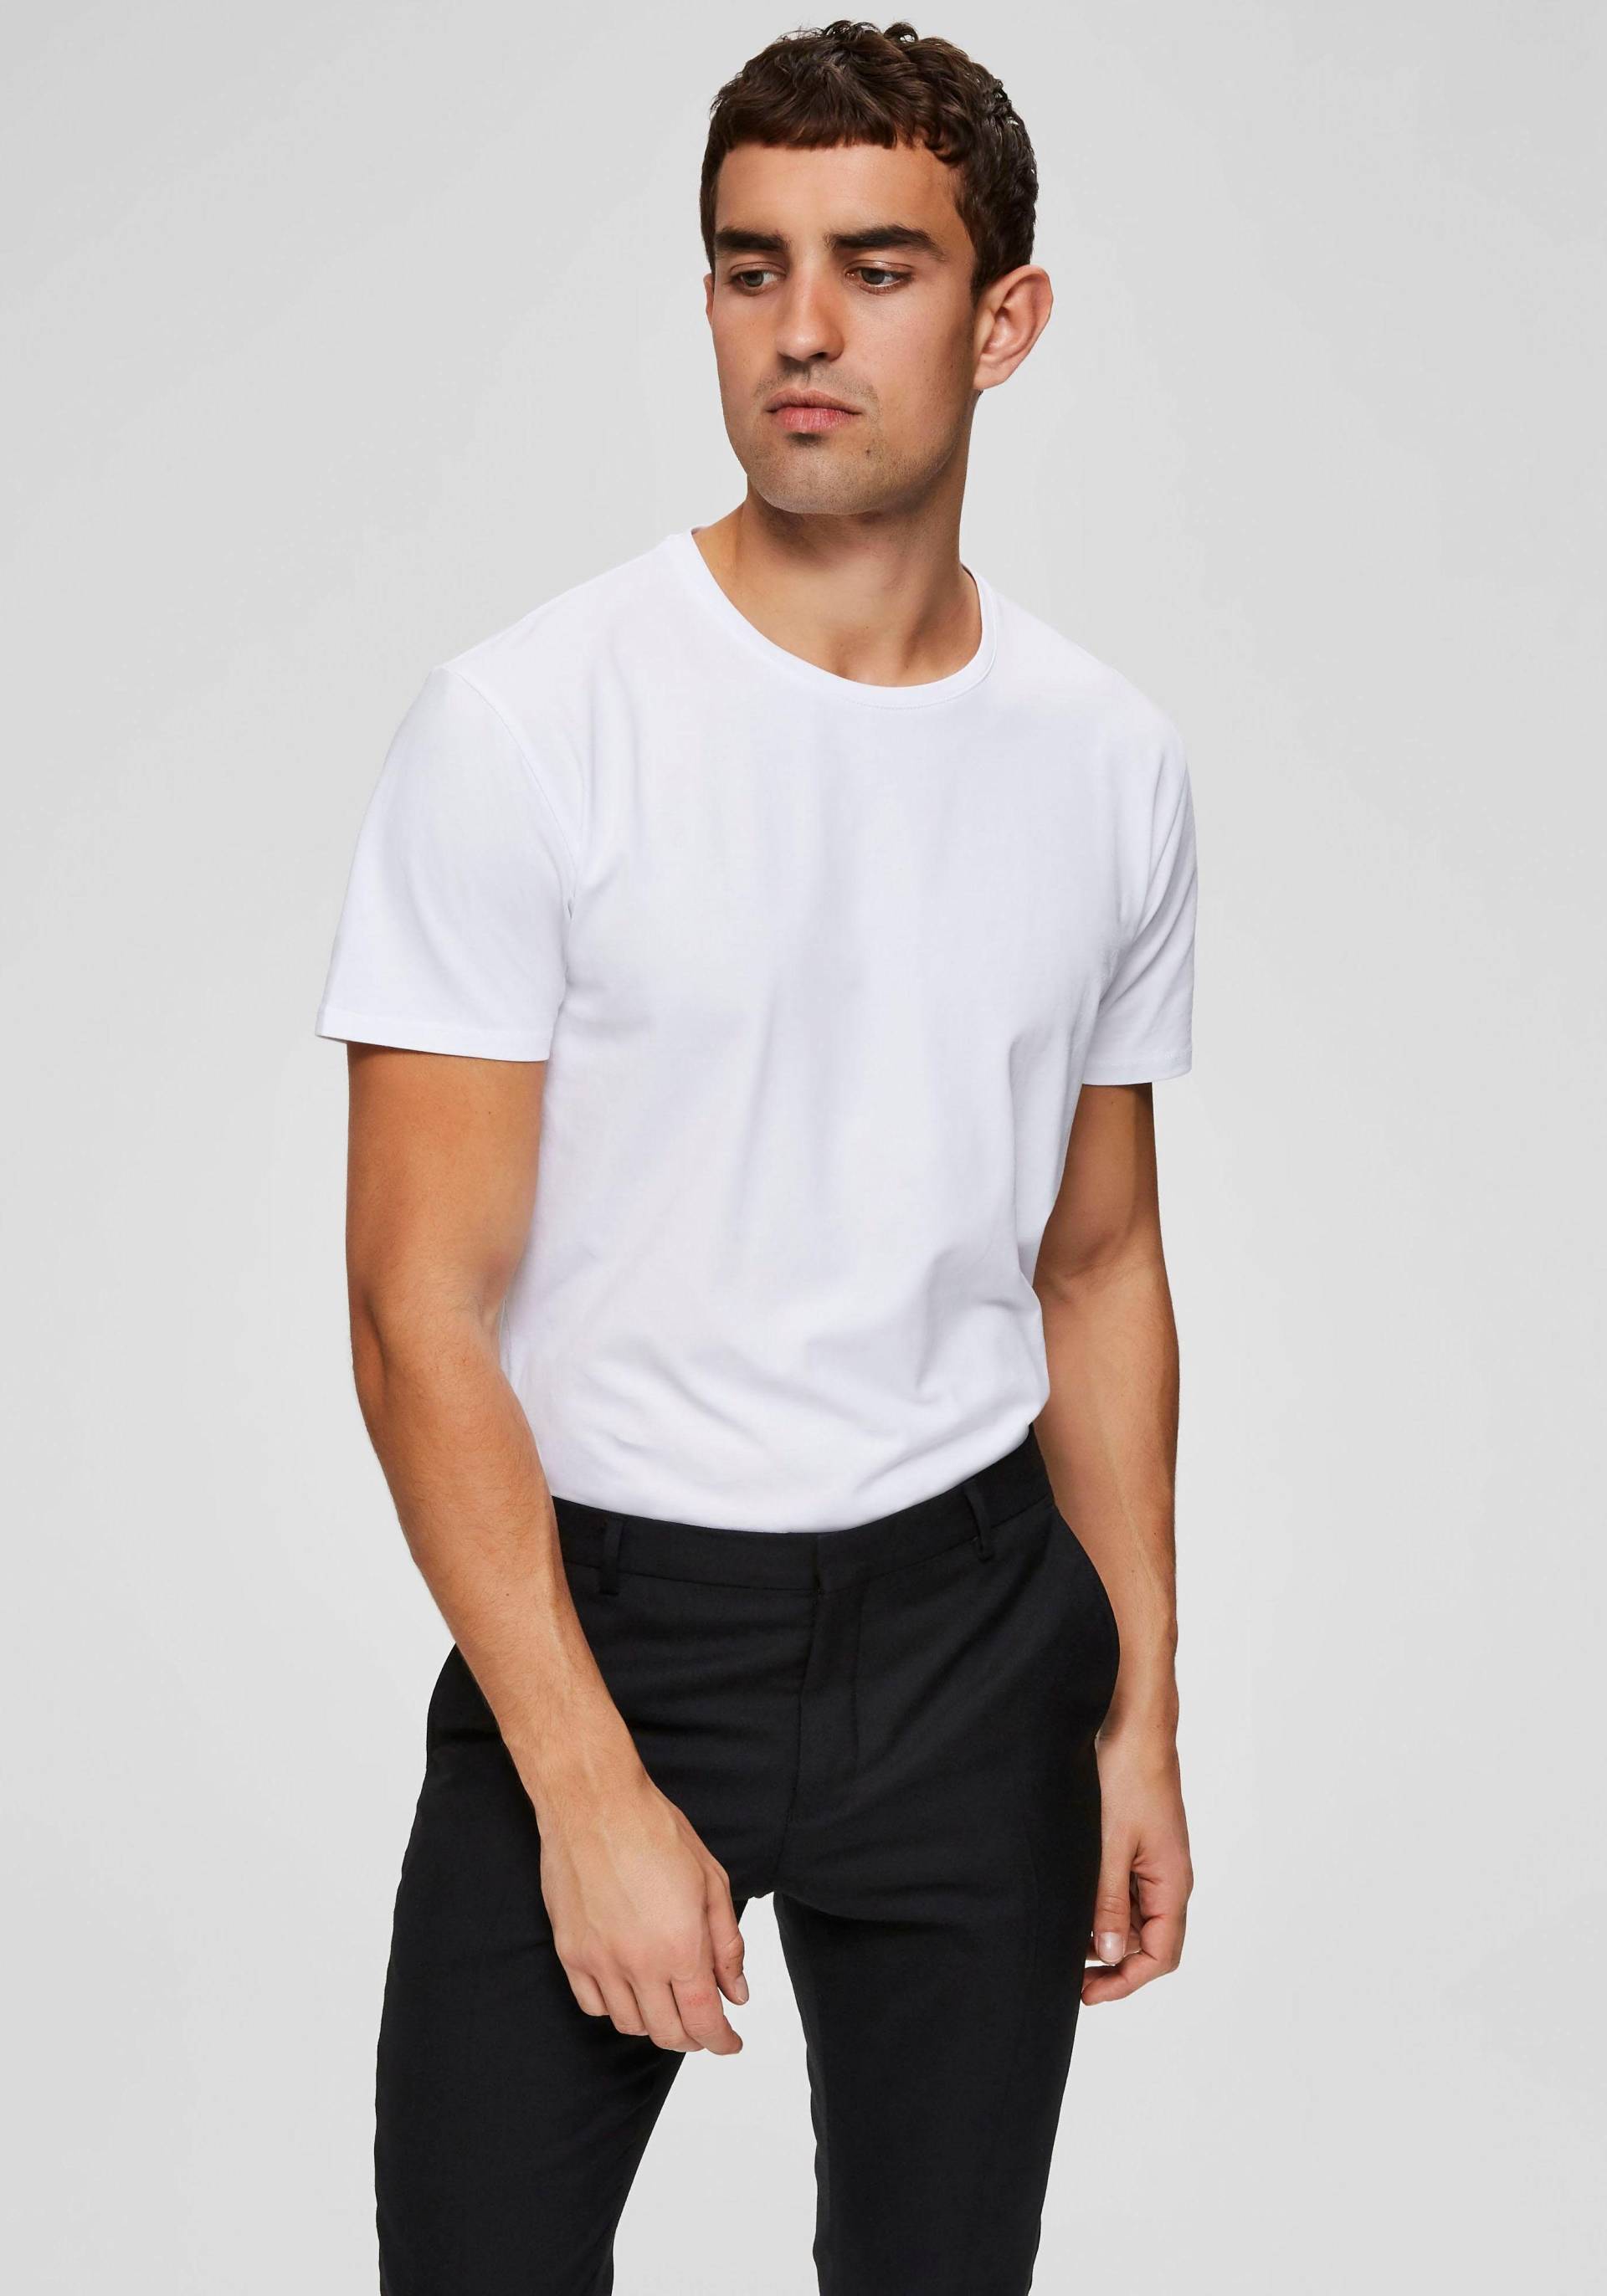 SELECTED HOMME Rundhalsshirt »Basic T-Shirt« von SELECTED HOMME